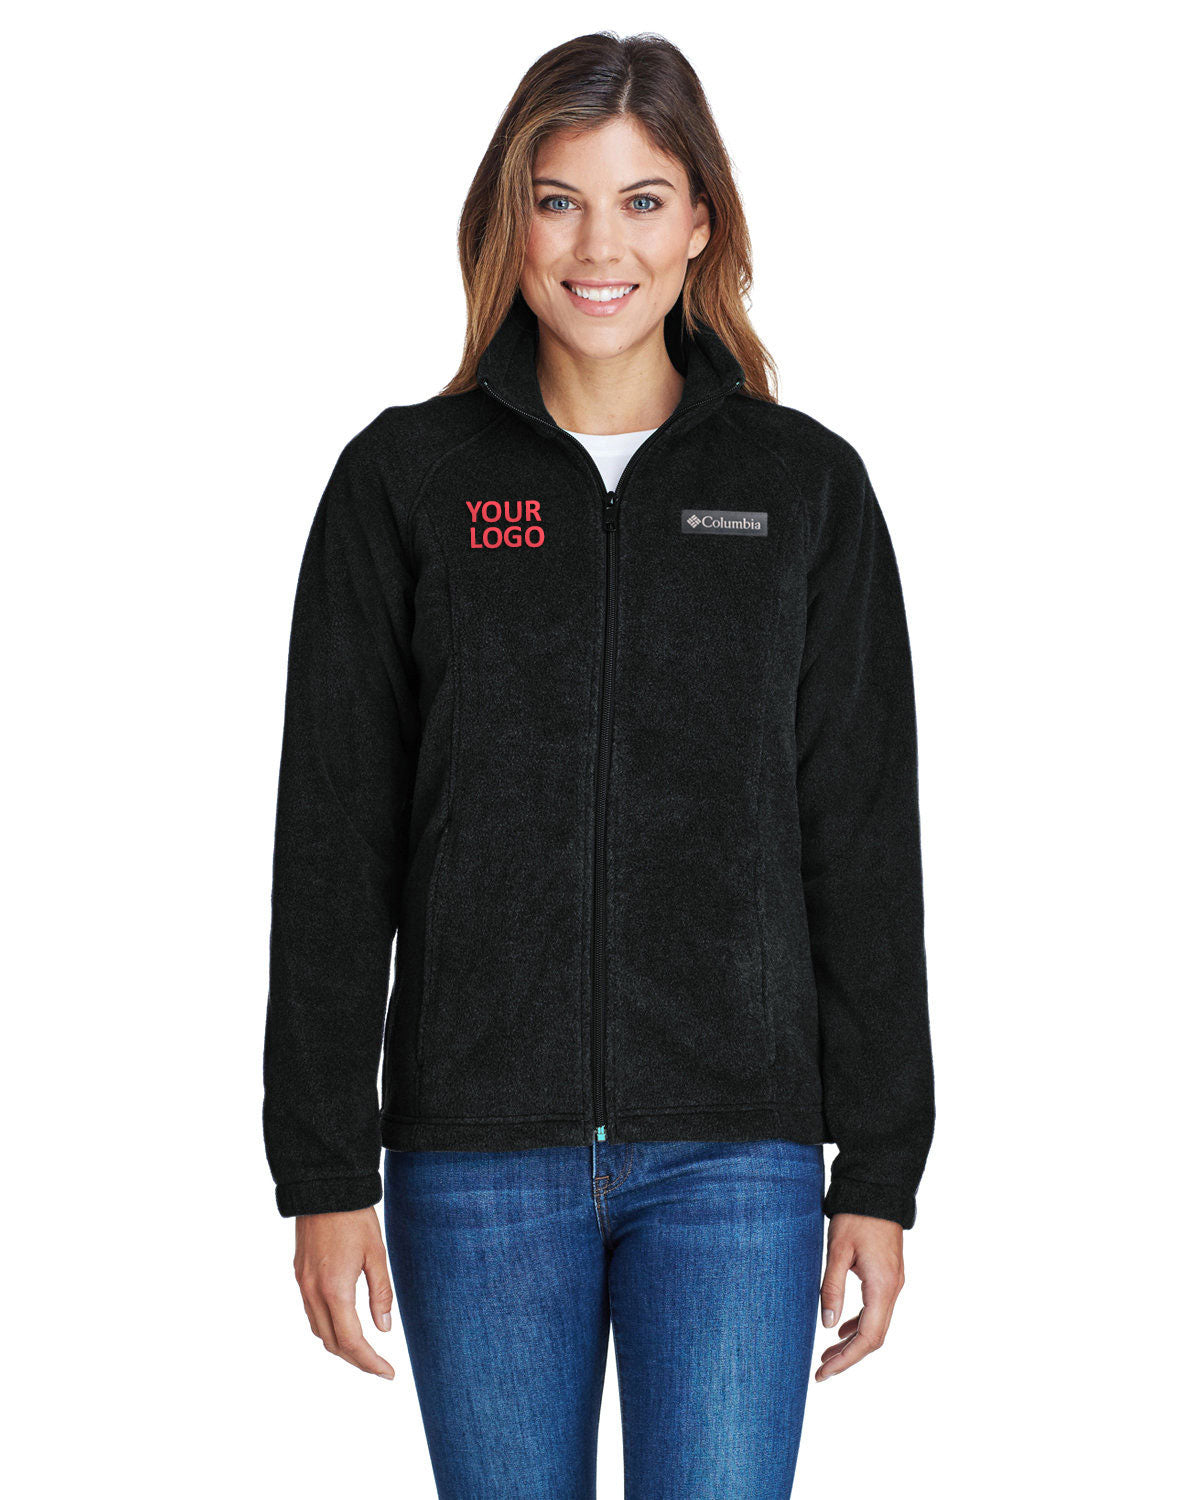 Columbia Black 6439 embroidered jackets for business